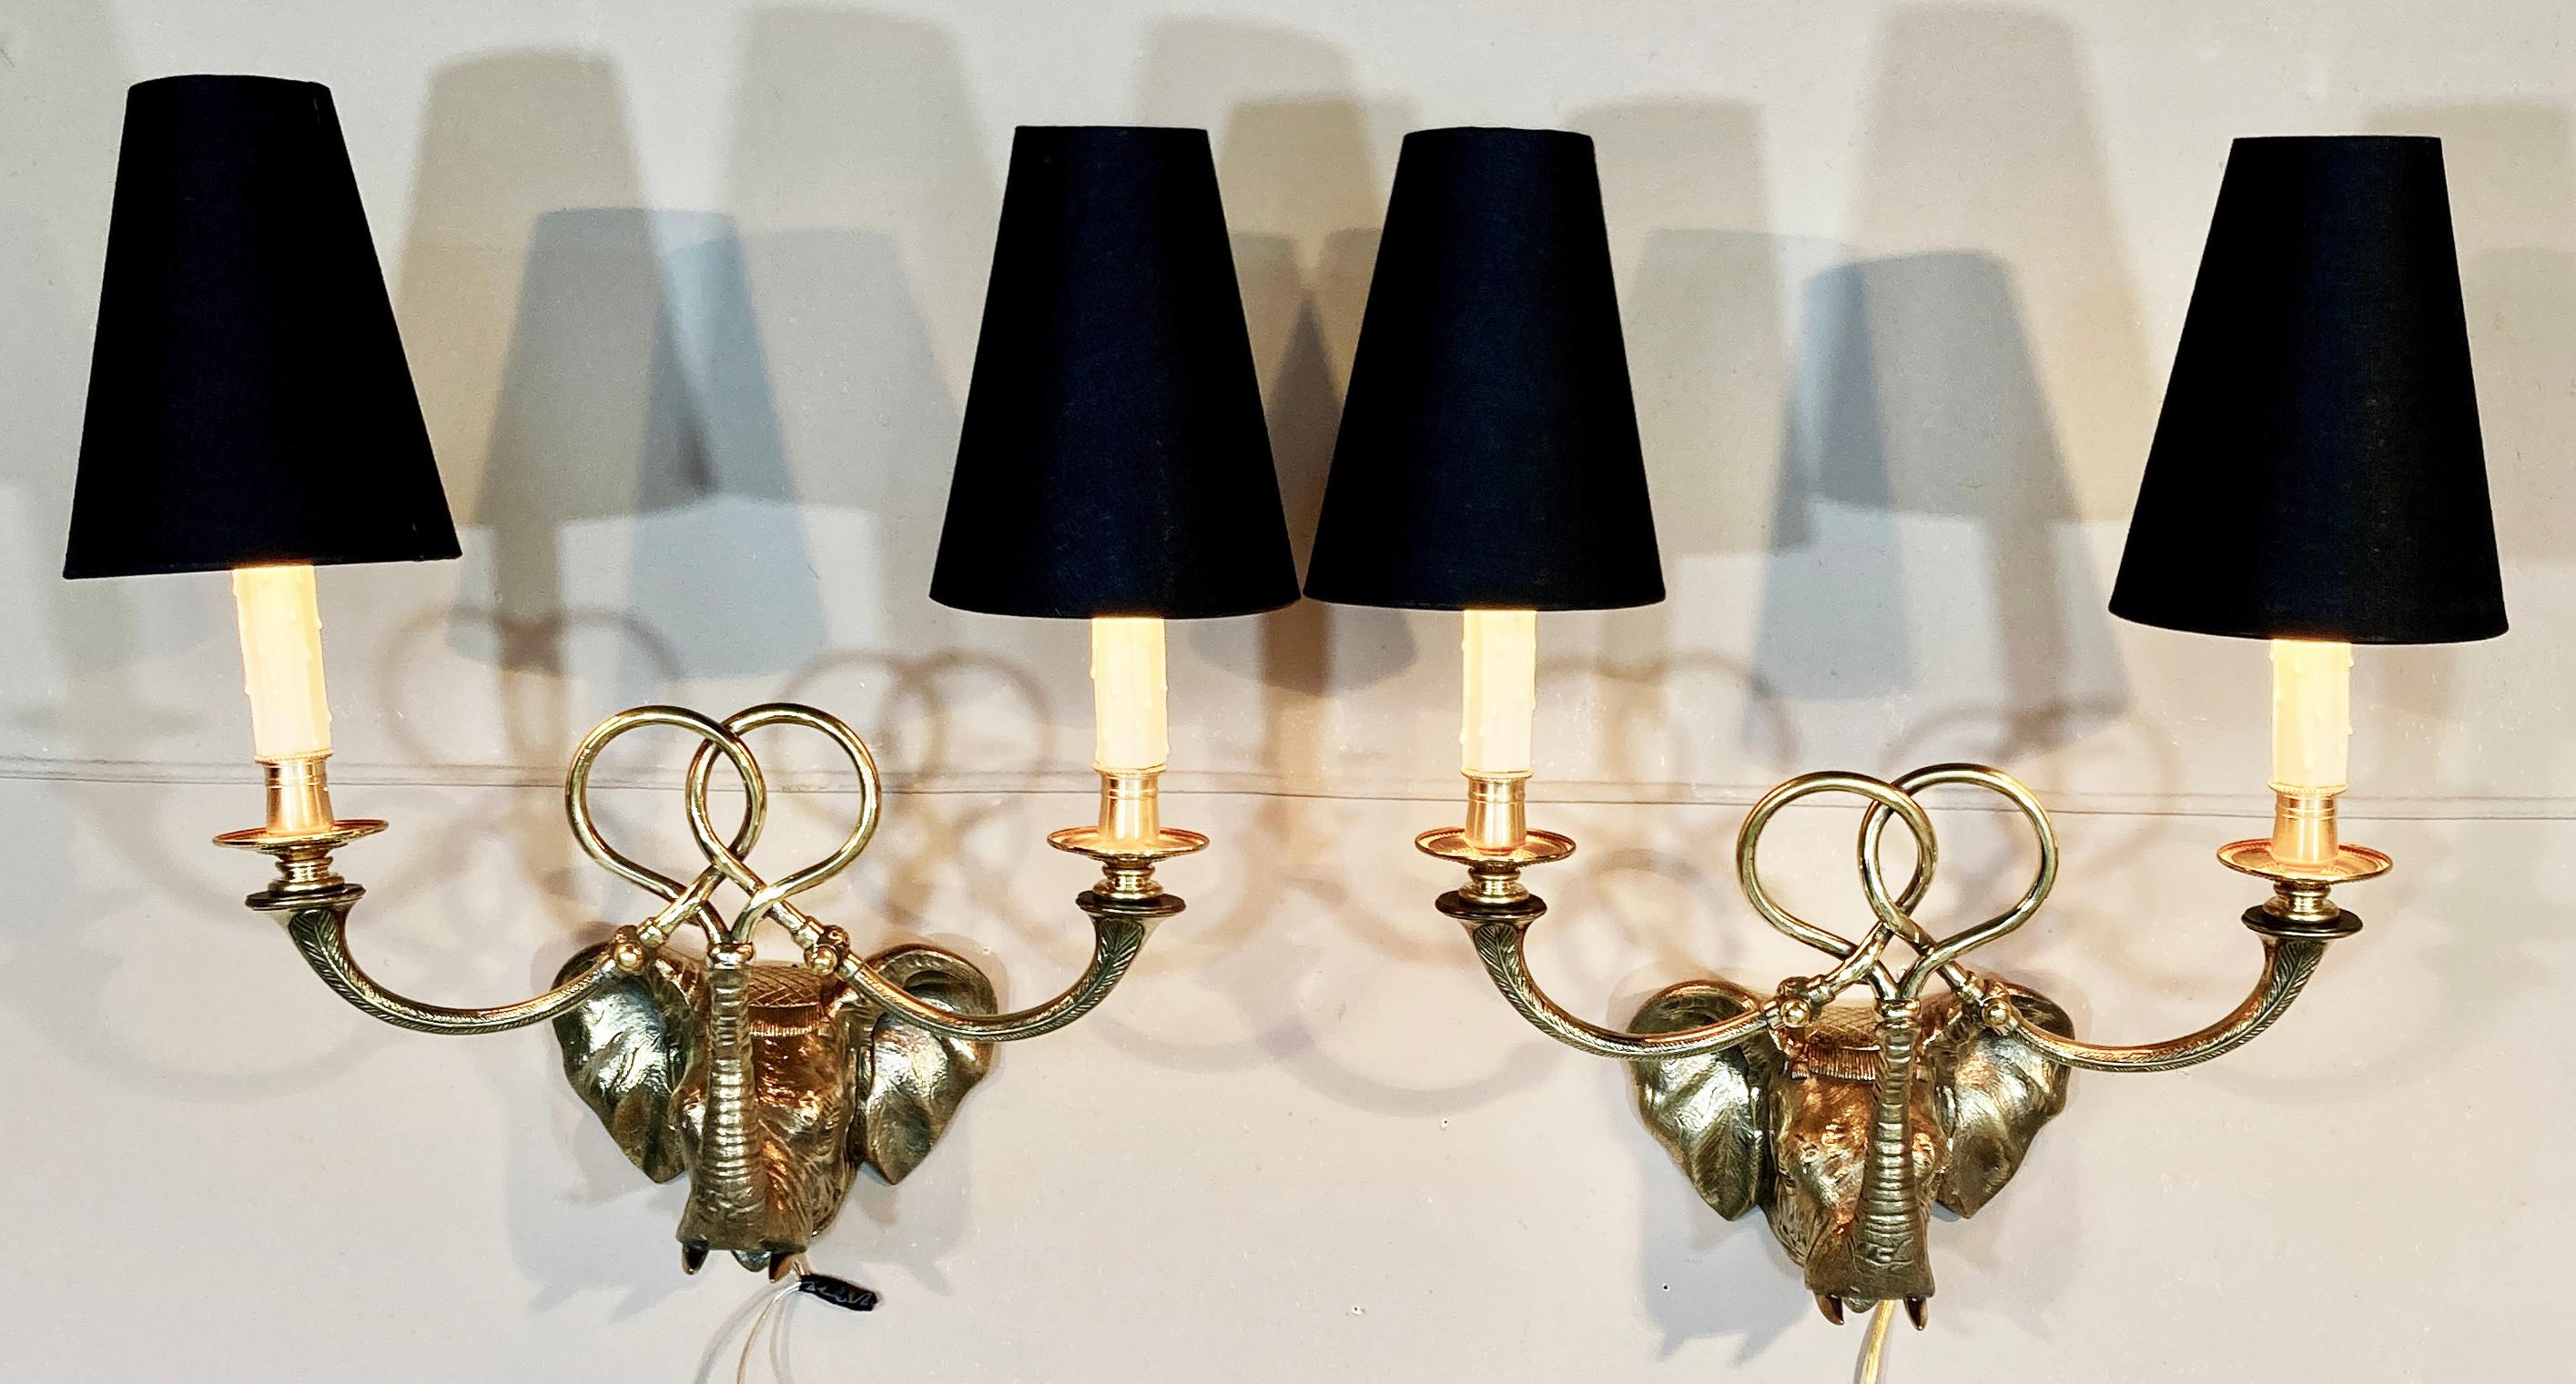 A spectacular pair of antique English brass sconces of the best quality.  The cast detail is crisp and assured, and the modeling is a true and eloquent expression of an elephant.  They are reminiscent of the British Raj style, but they could work in